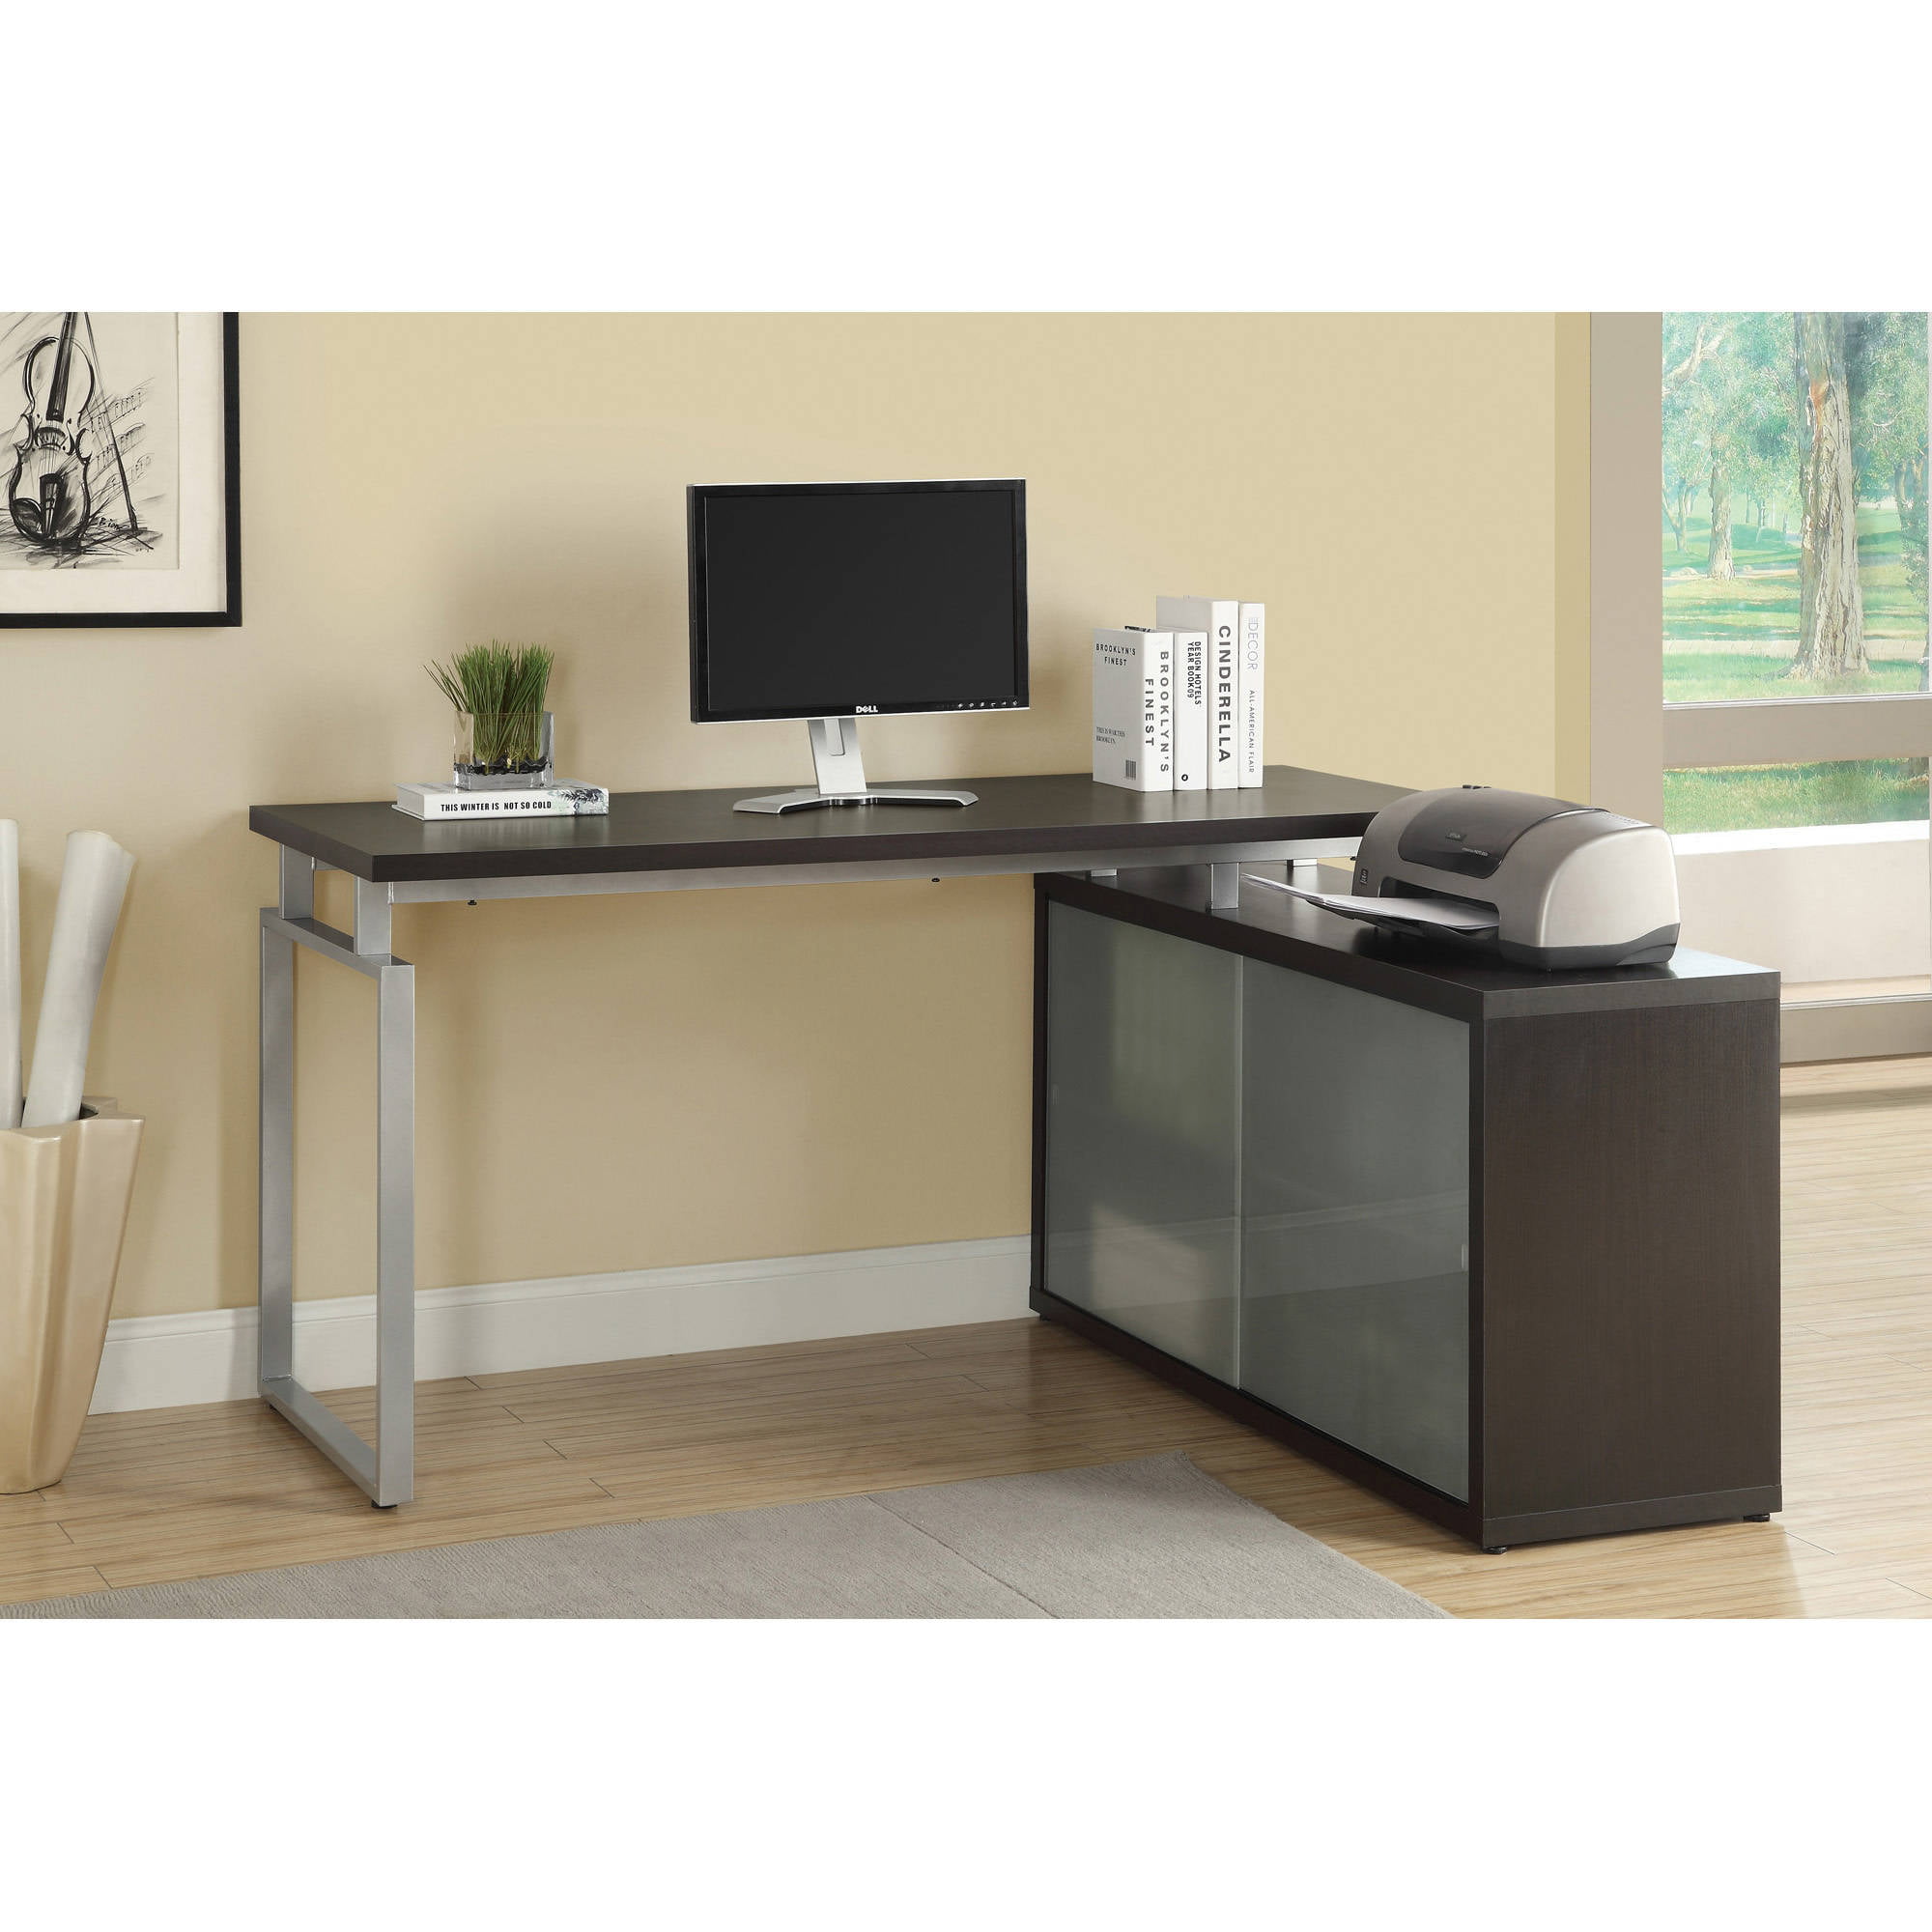 Monarch Computer Desk Cappuccino Corner With Frosted Glass